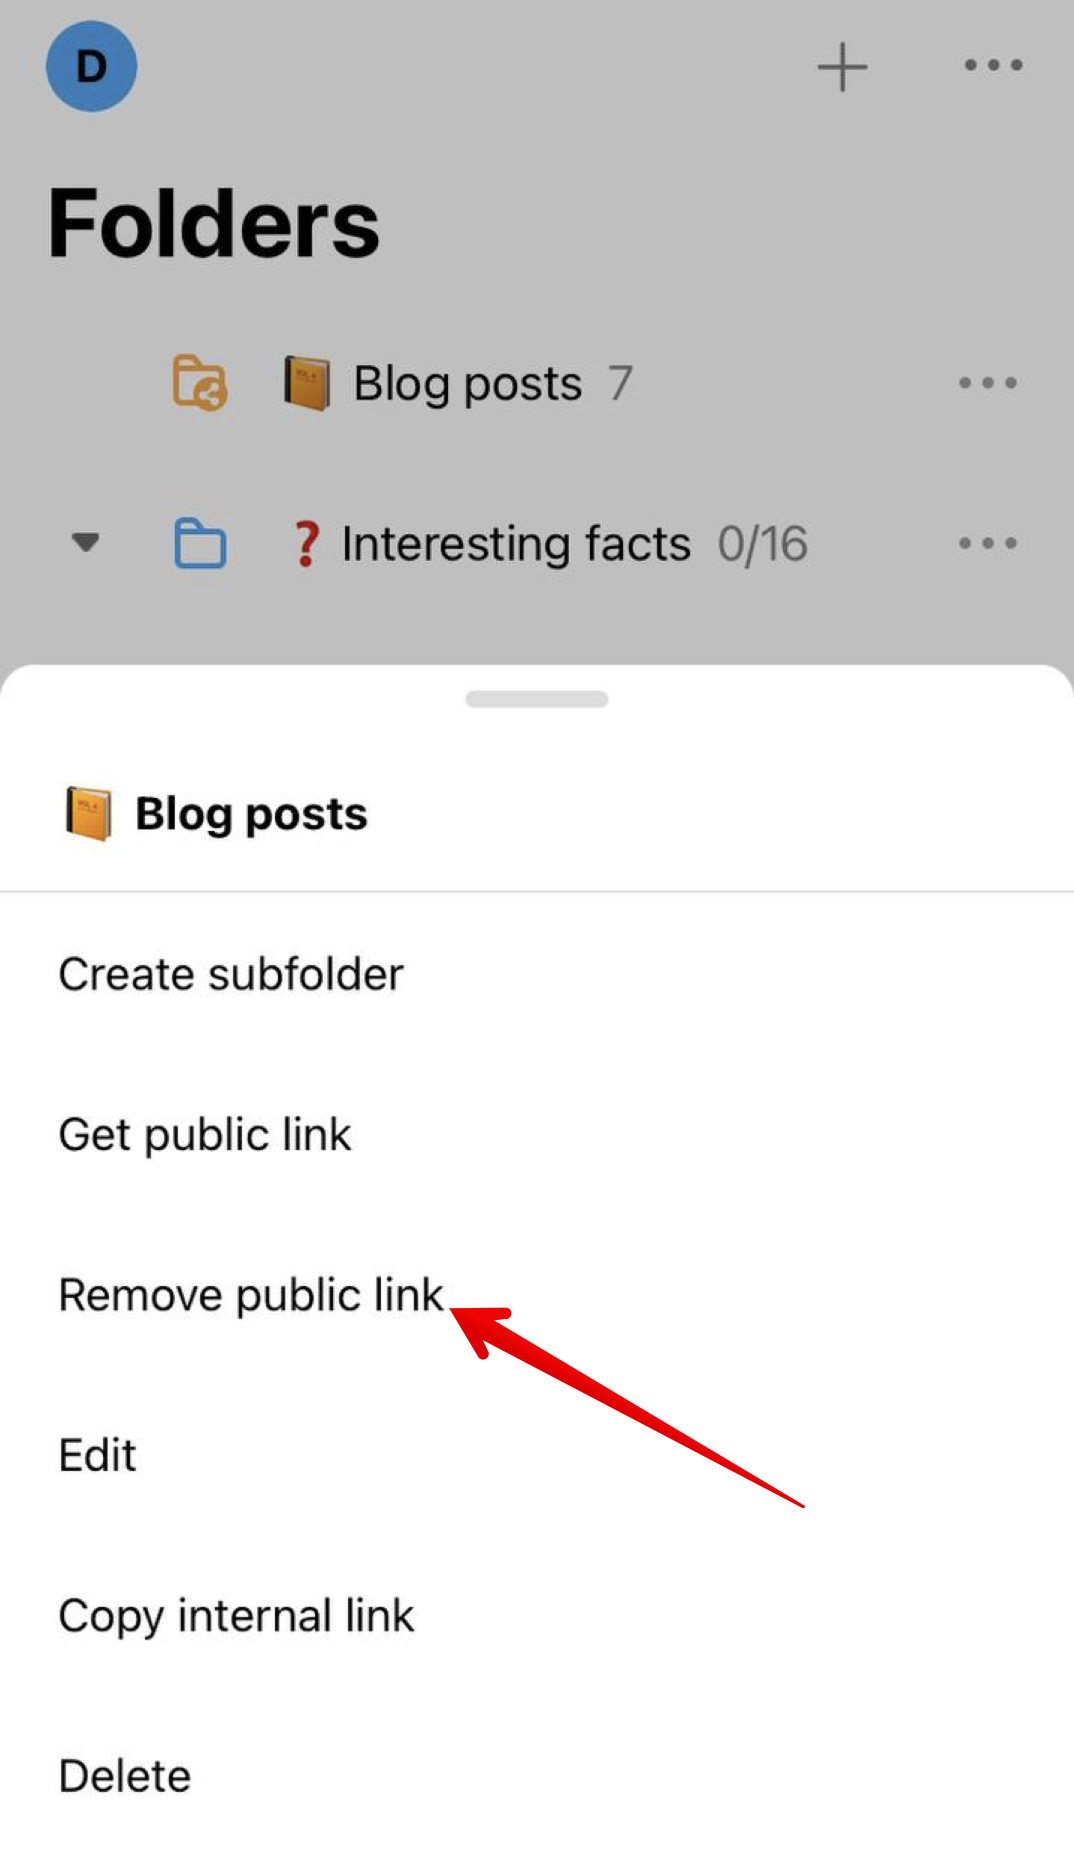 To remove a shared link from the folder / subfolders, do the following.